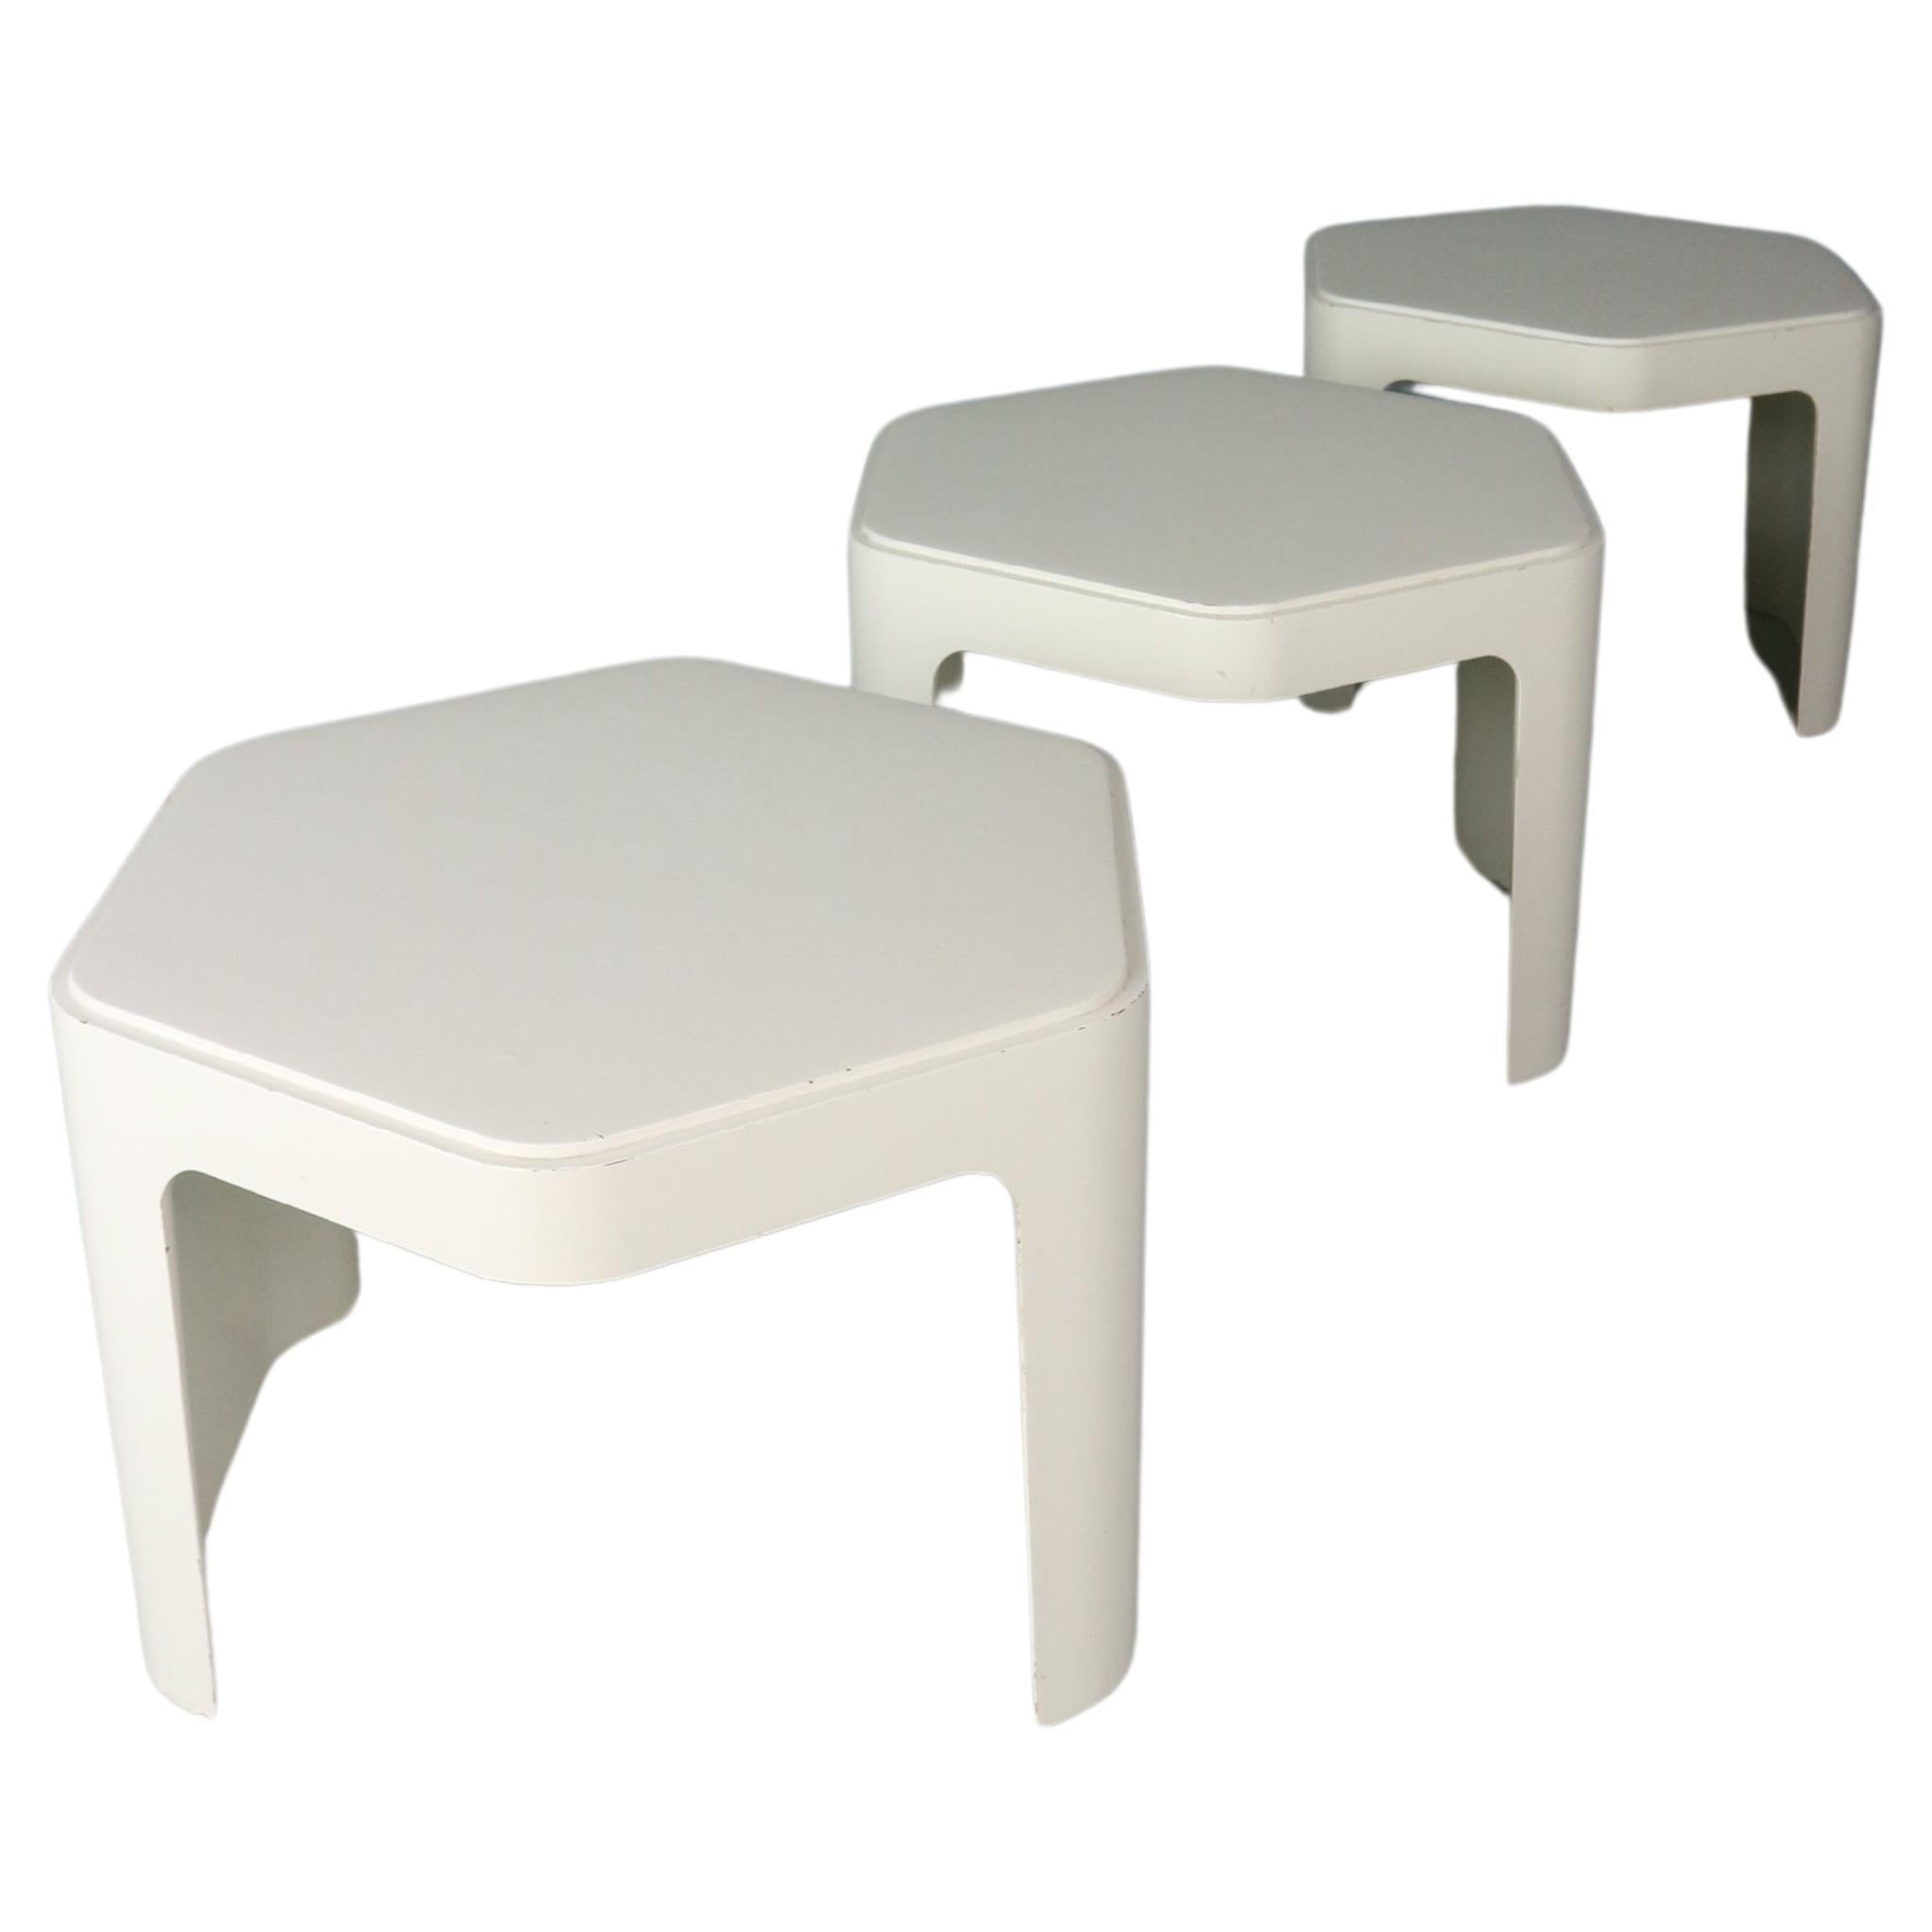 3x Hexagonal side tables by Peter Ghyzcy for Form + Life Collection, 1970. For Sale